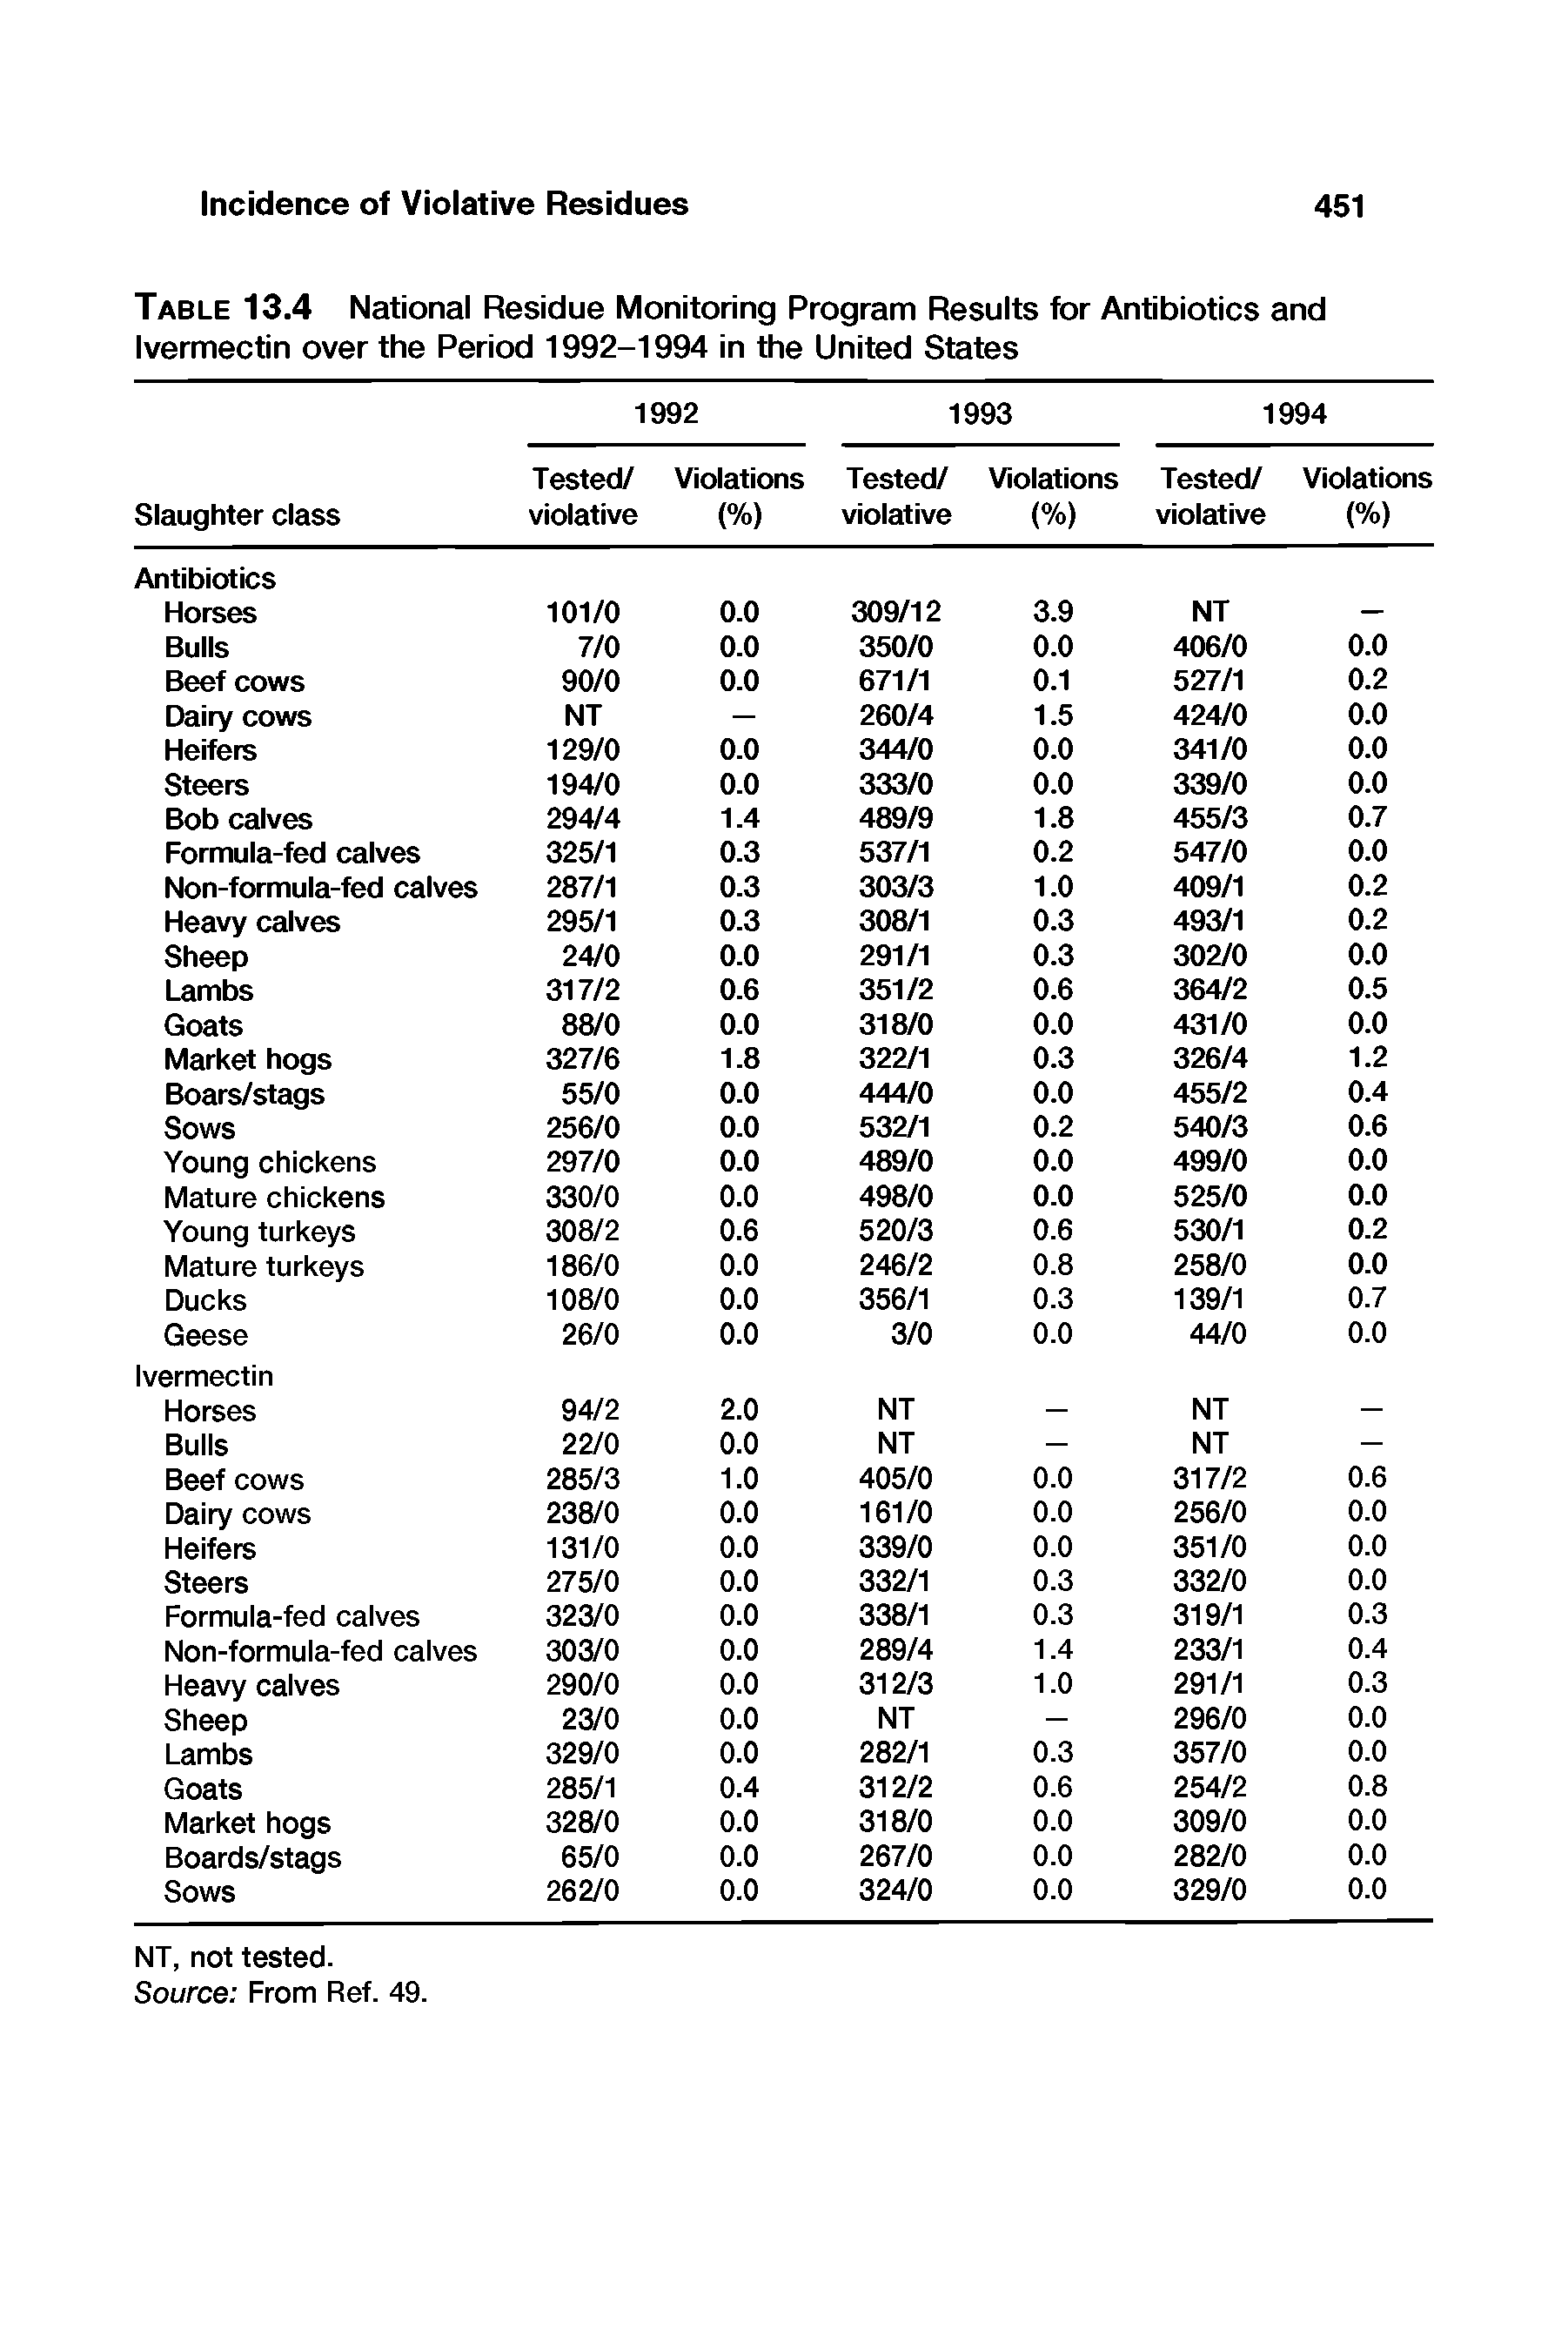 Table 13.4 National Residue Monitoring Program Results for Antibiotics and Ivermectin over the Period 1992-1994 in the United States...